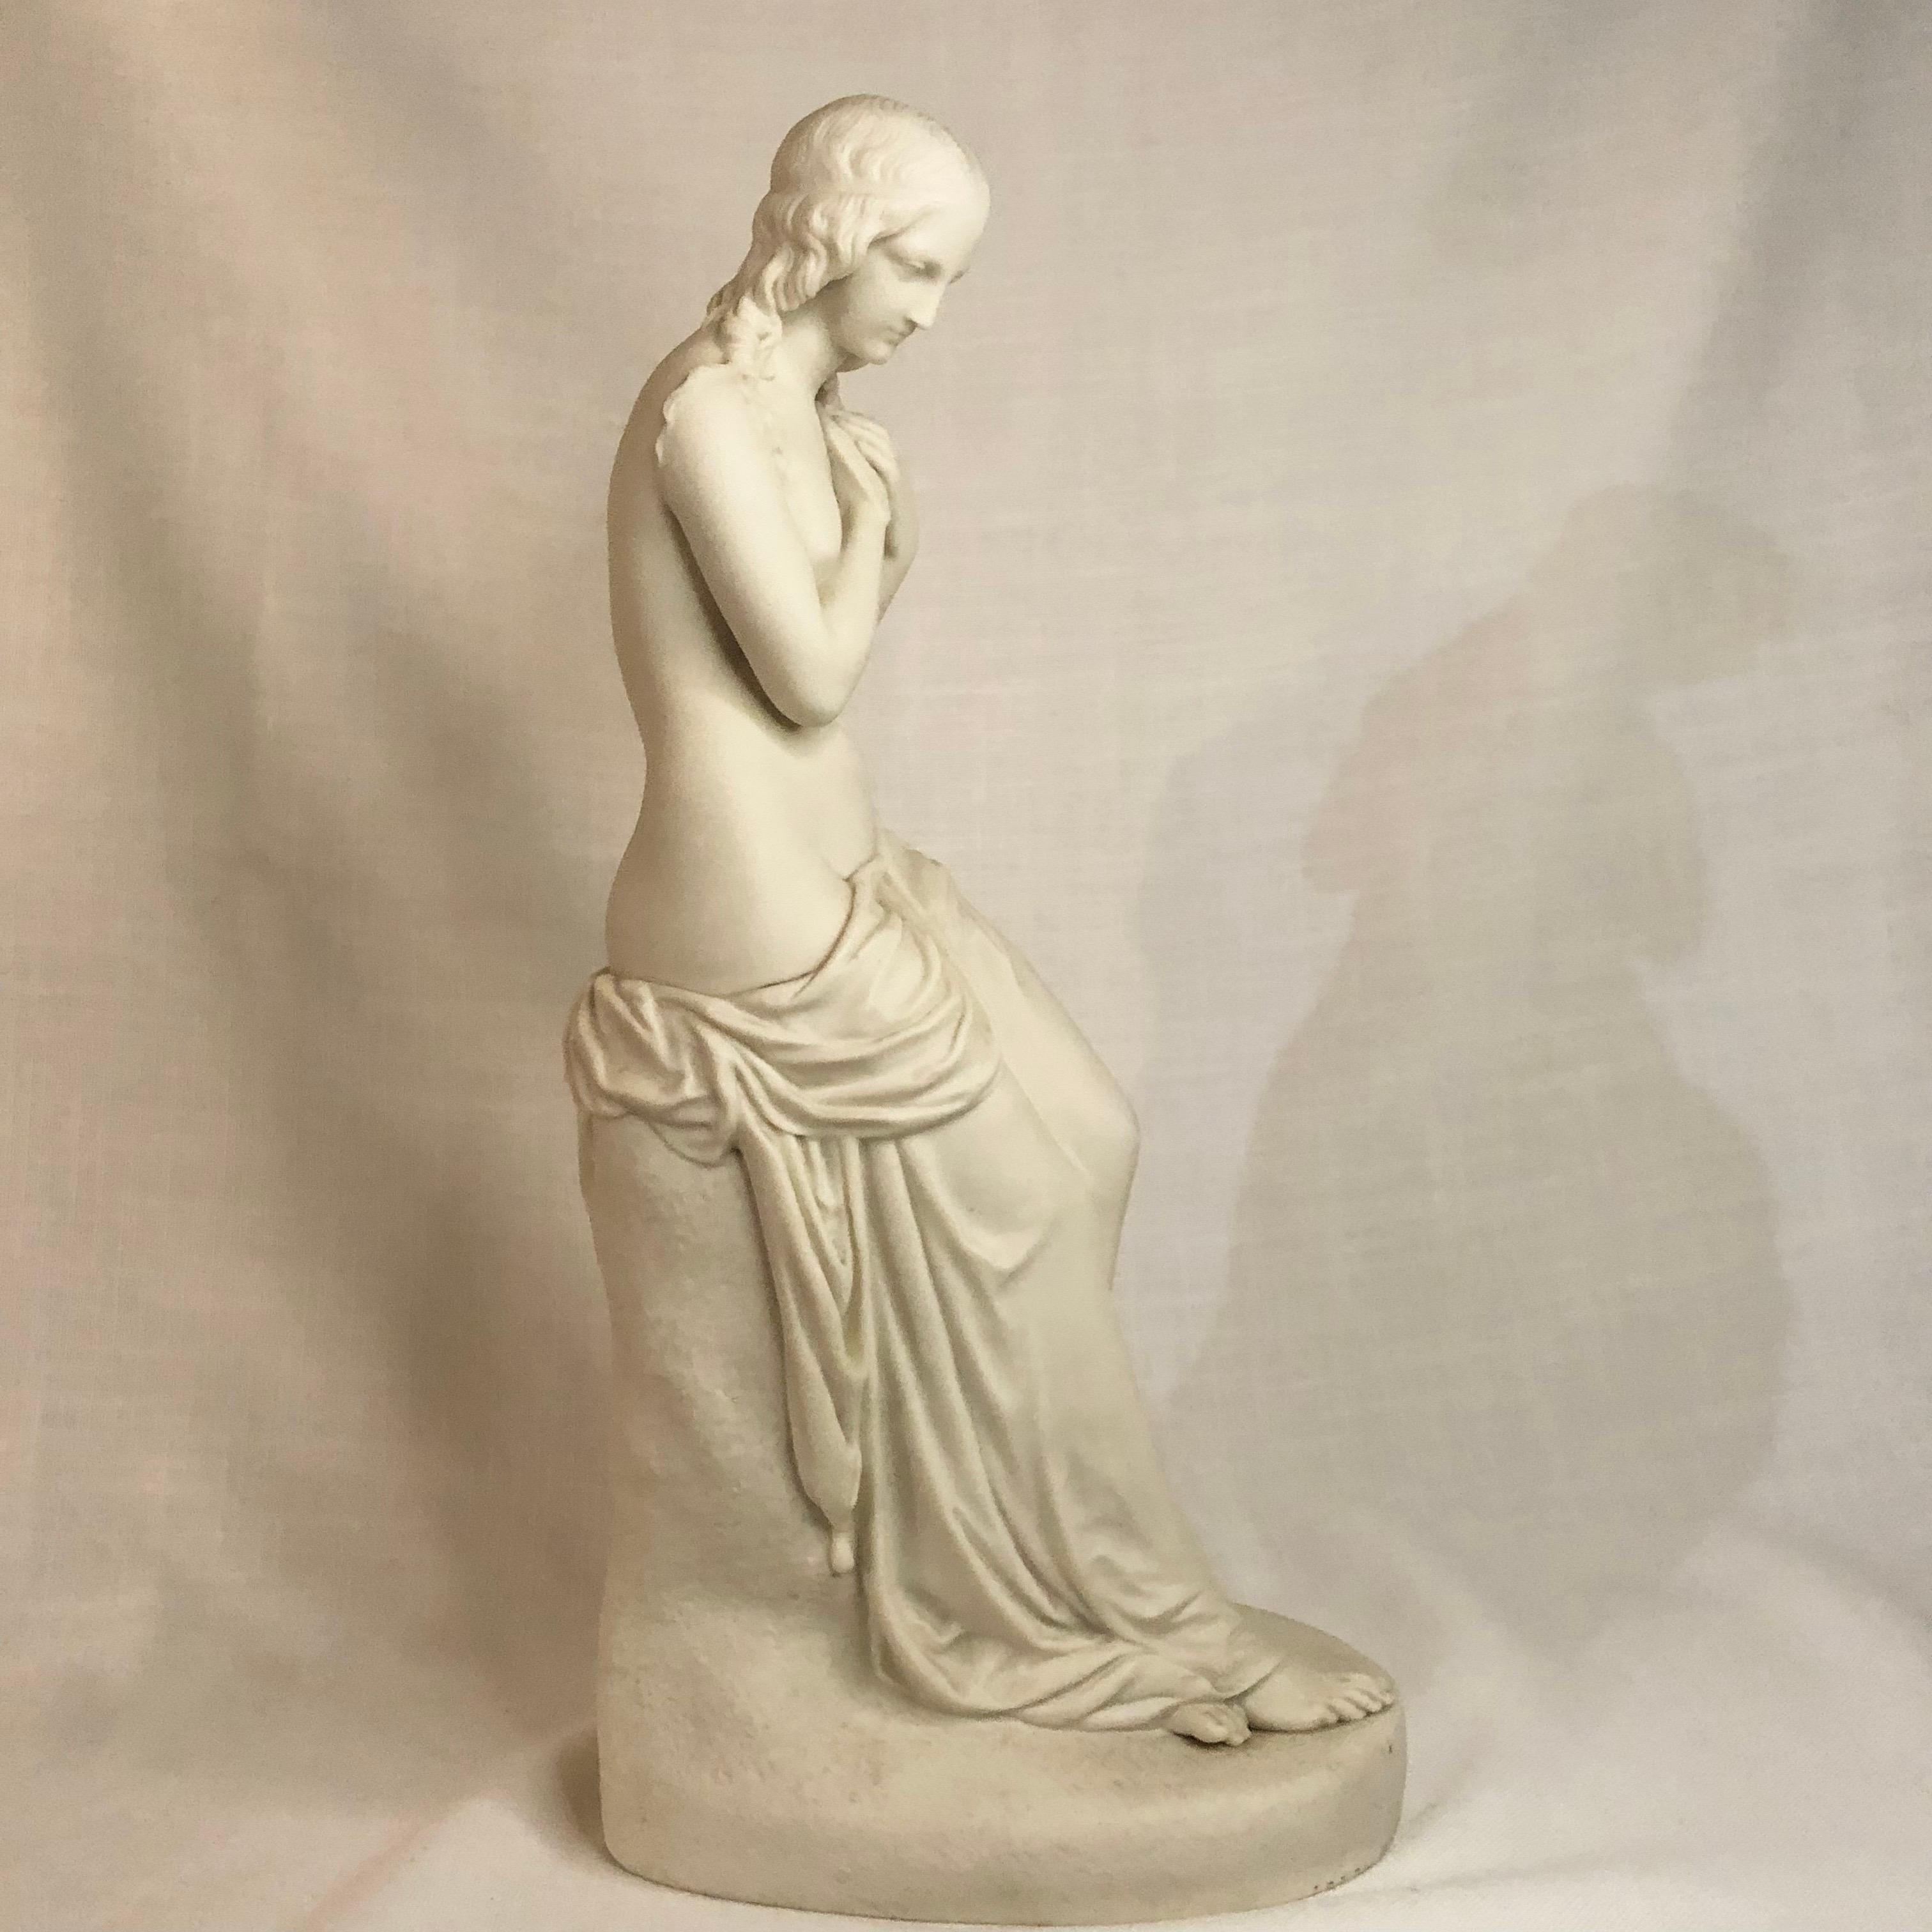 Tall Copeland Parian Figure of Exquisite Lady Named Innocence Holding a Bird 8